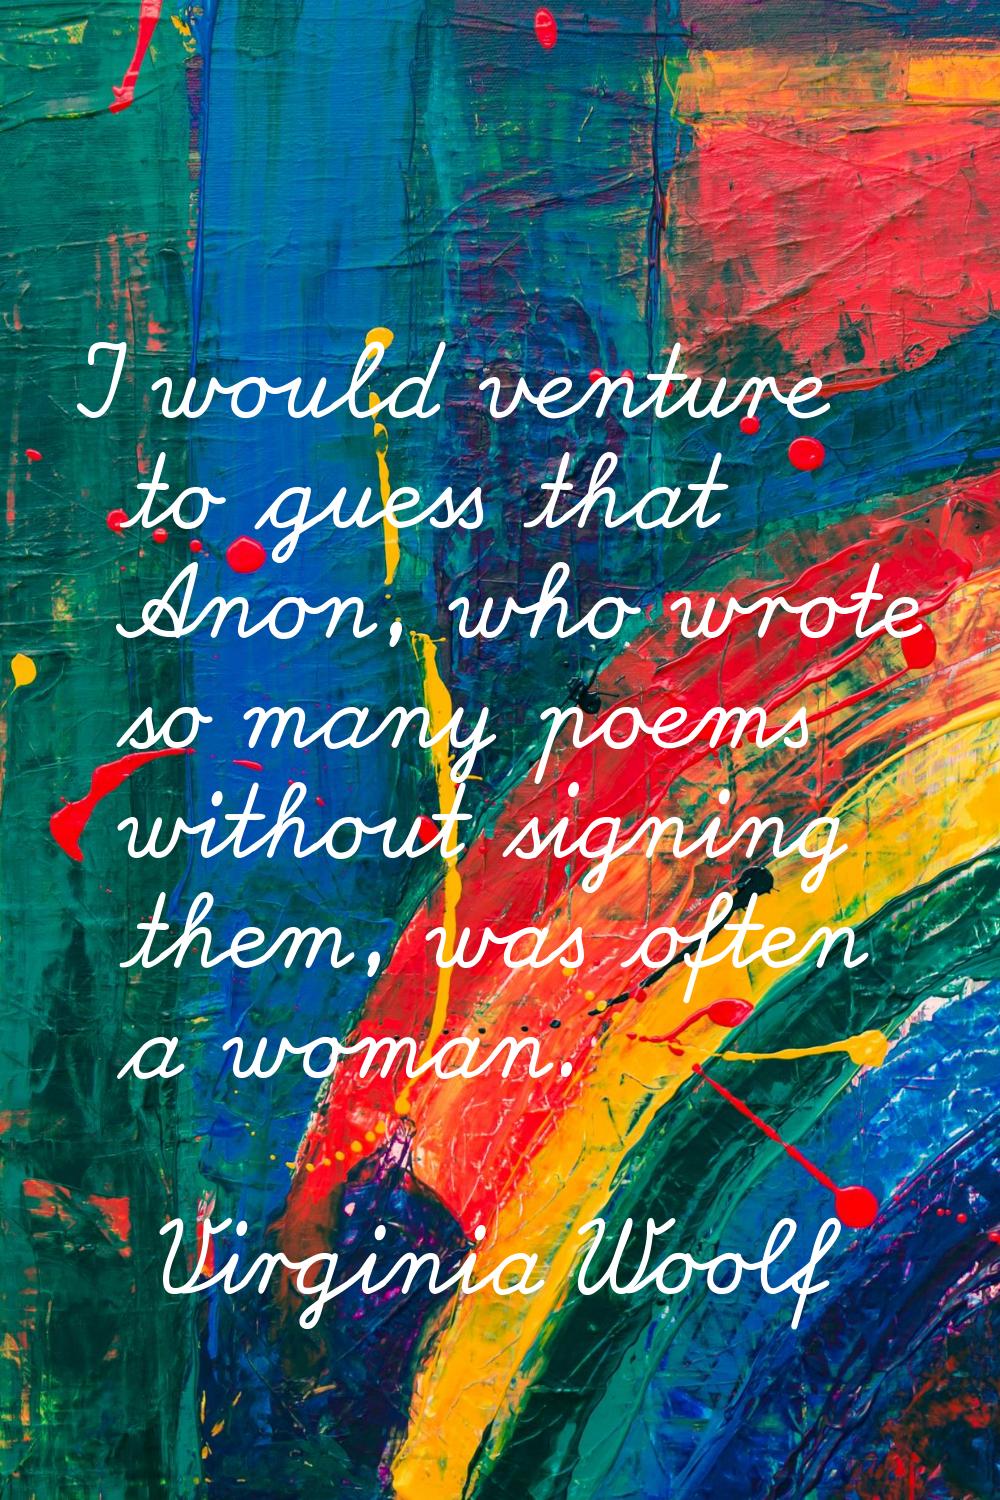 I would venture to guess that Anon, who wrote so many poems without signing them, was often a woman